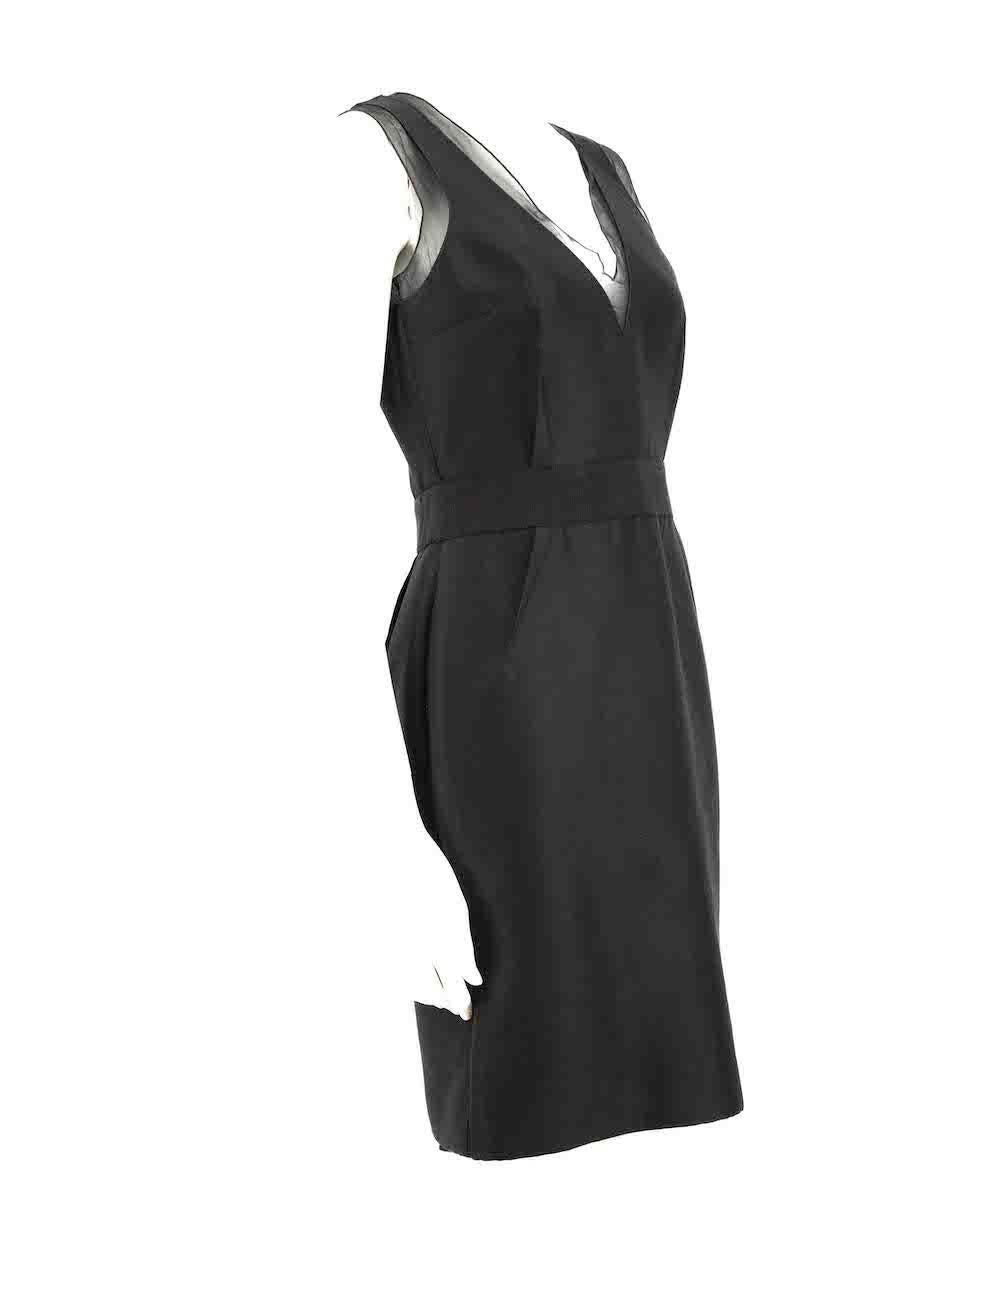 CONDITION is Very good. Minimal wear to dress is evident. Minimal wear to the rear slit with a small tear to the seam on this used Giambattista Valli designer resale item.
 
 
 
 Details
 
 
 Black
 
 Cotton
 
 Knee length dress
 
 V neckline
 
